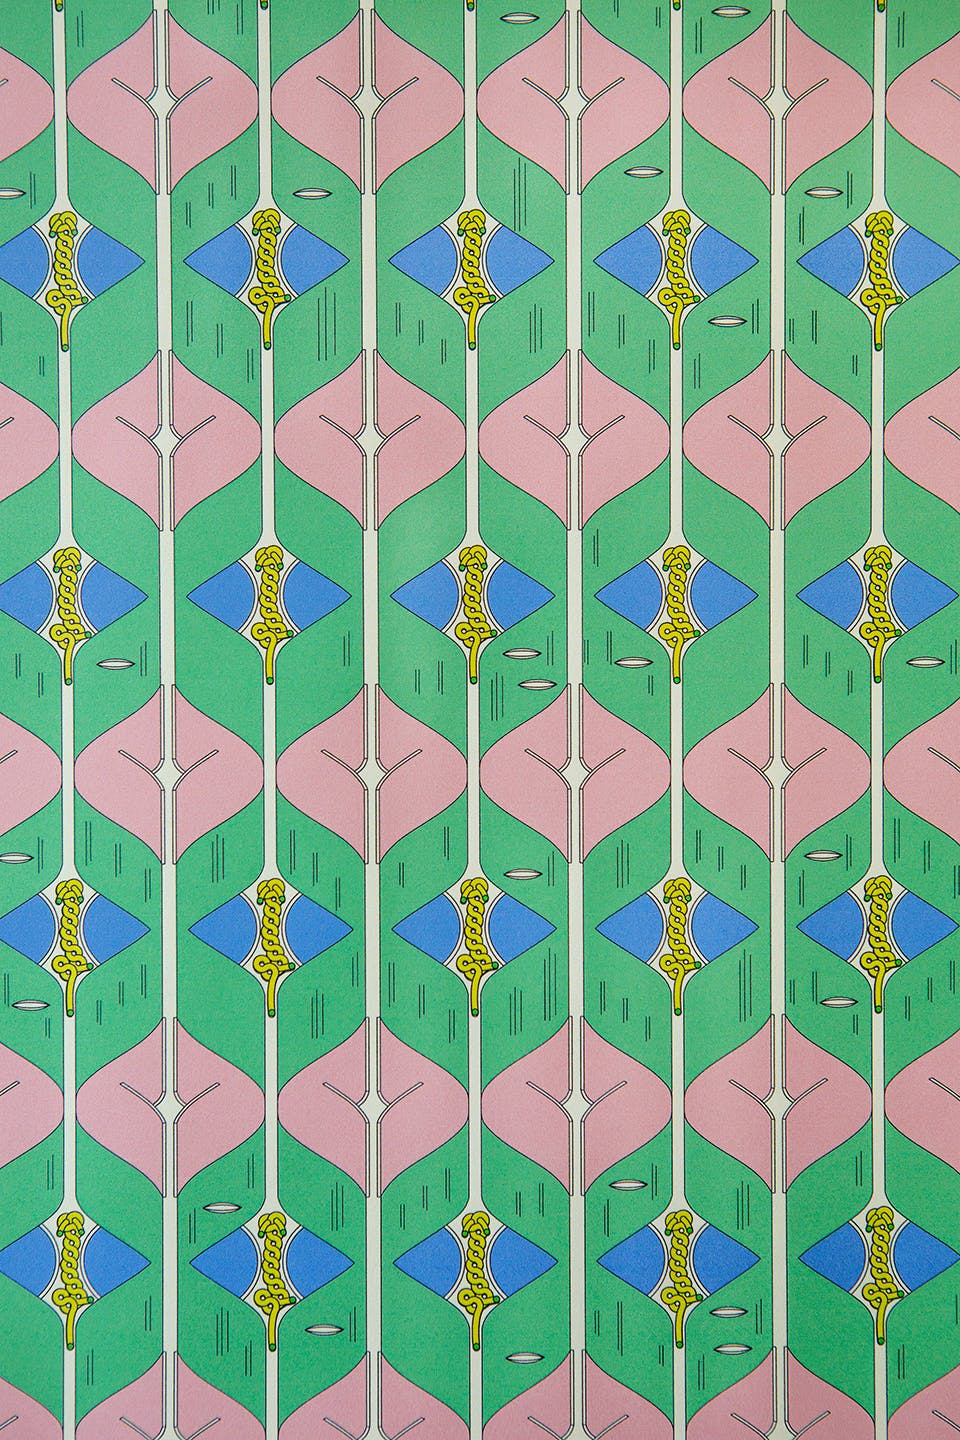 A patterned print. The pattern has a green background; is made of rows of pink and blue diamond-like shapes. The blue shapes have a yellow rope-like shape in the middle. White lines connect each row.